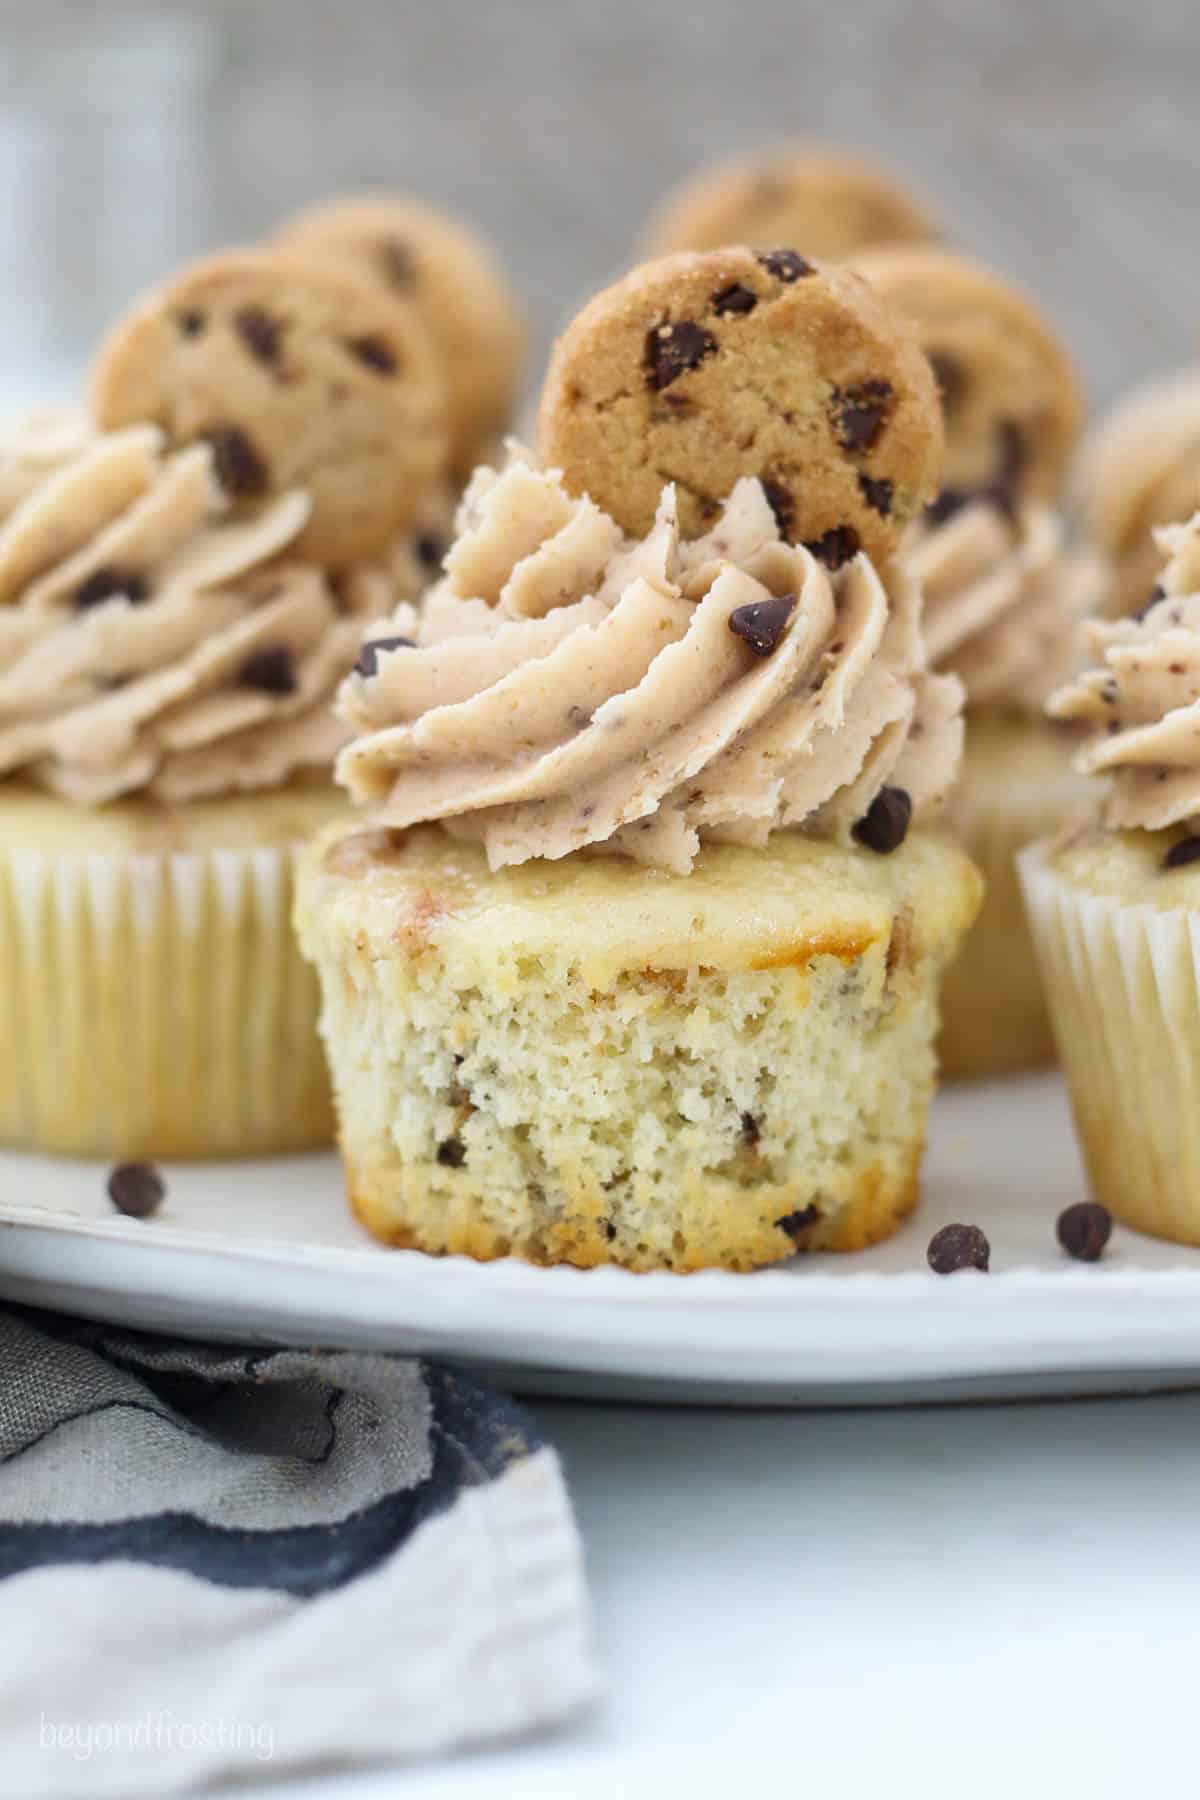 A close up of an unwrapped cupcake with frosting and topped with a mini chocolate chip cookie